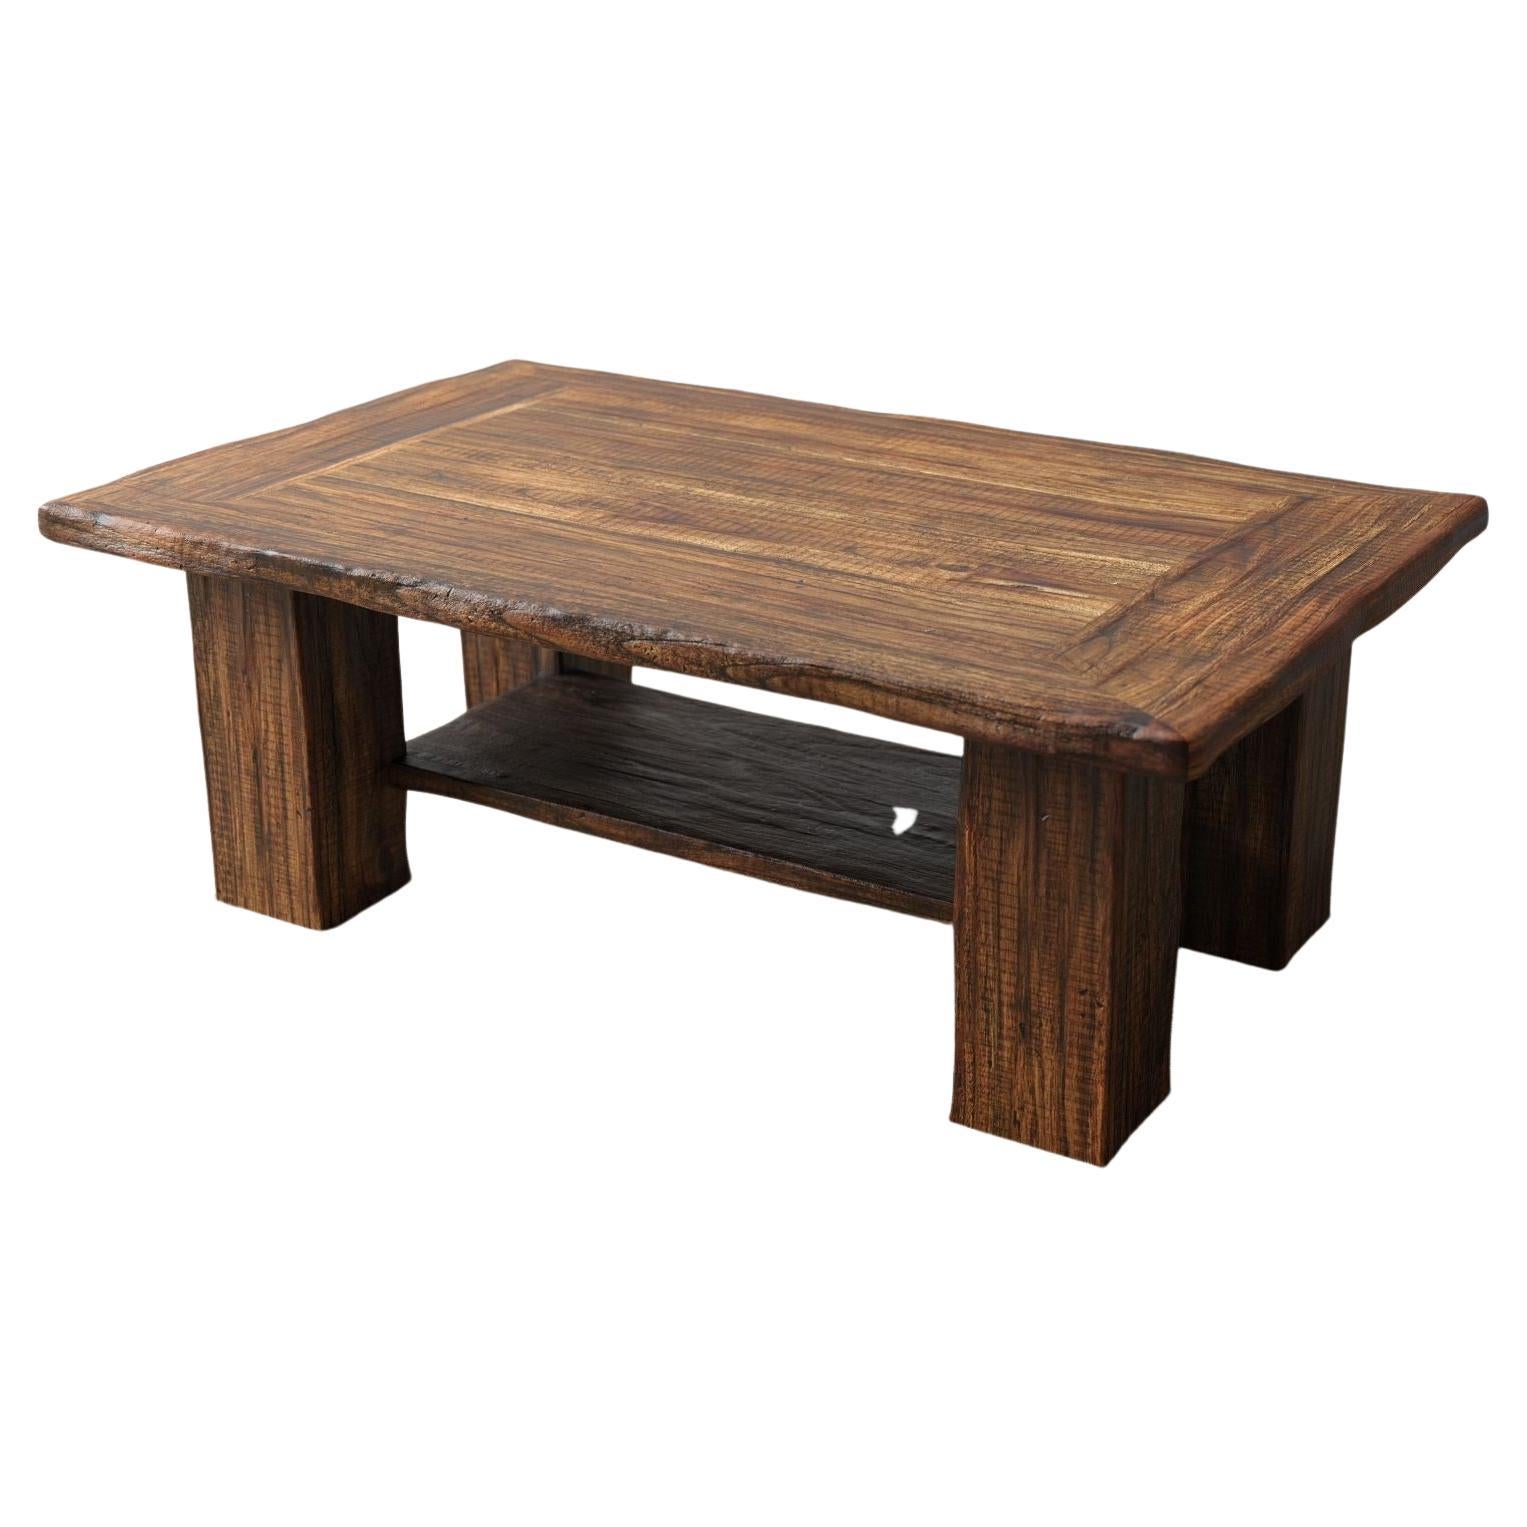 Rustic Solid Teak Sandblasted Coffee Table with Lower Shelf in Autumn For Sale